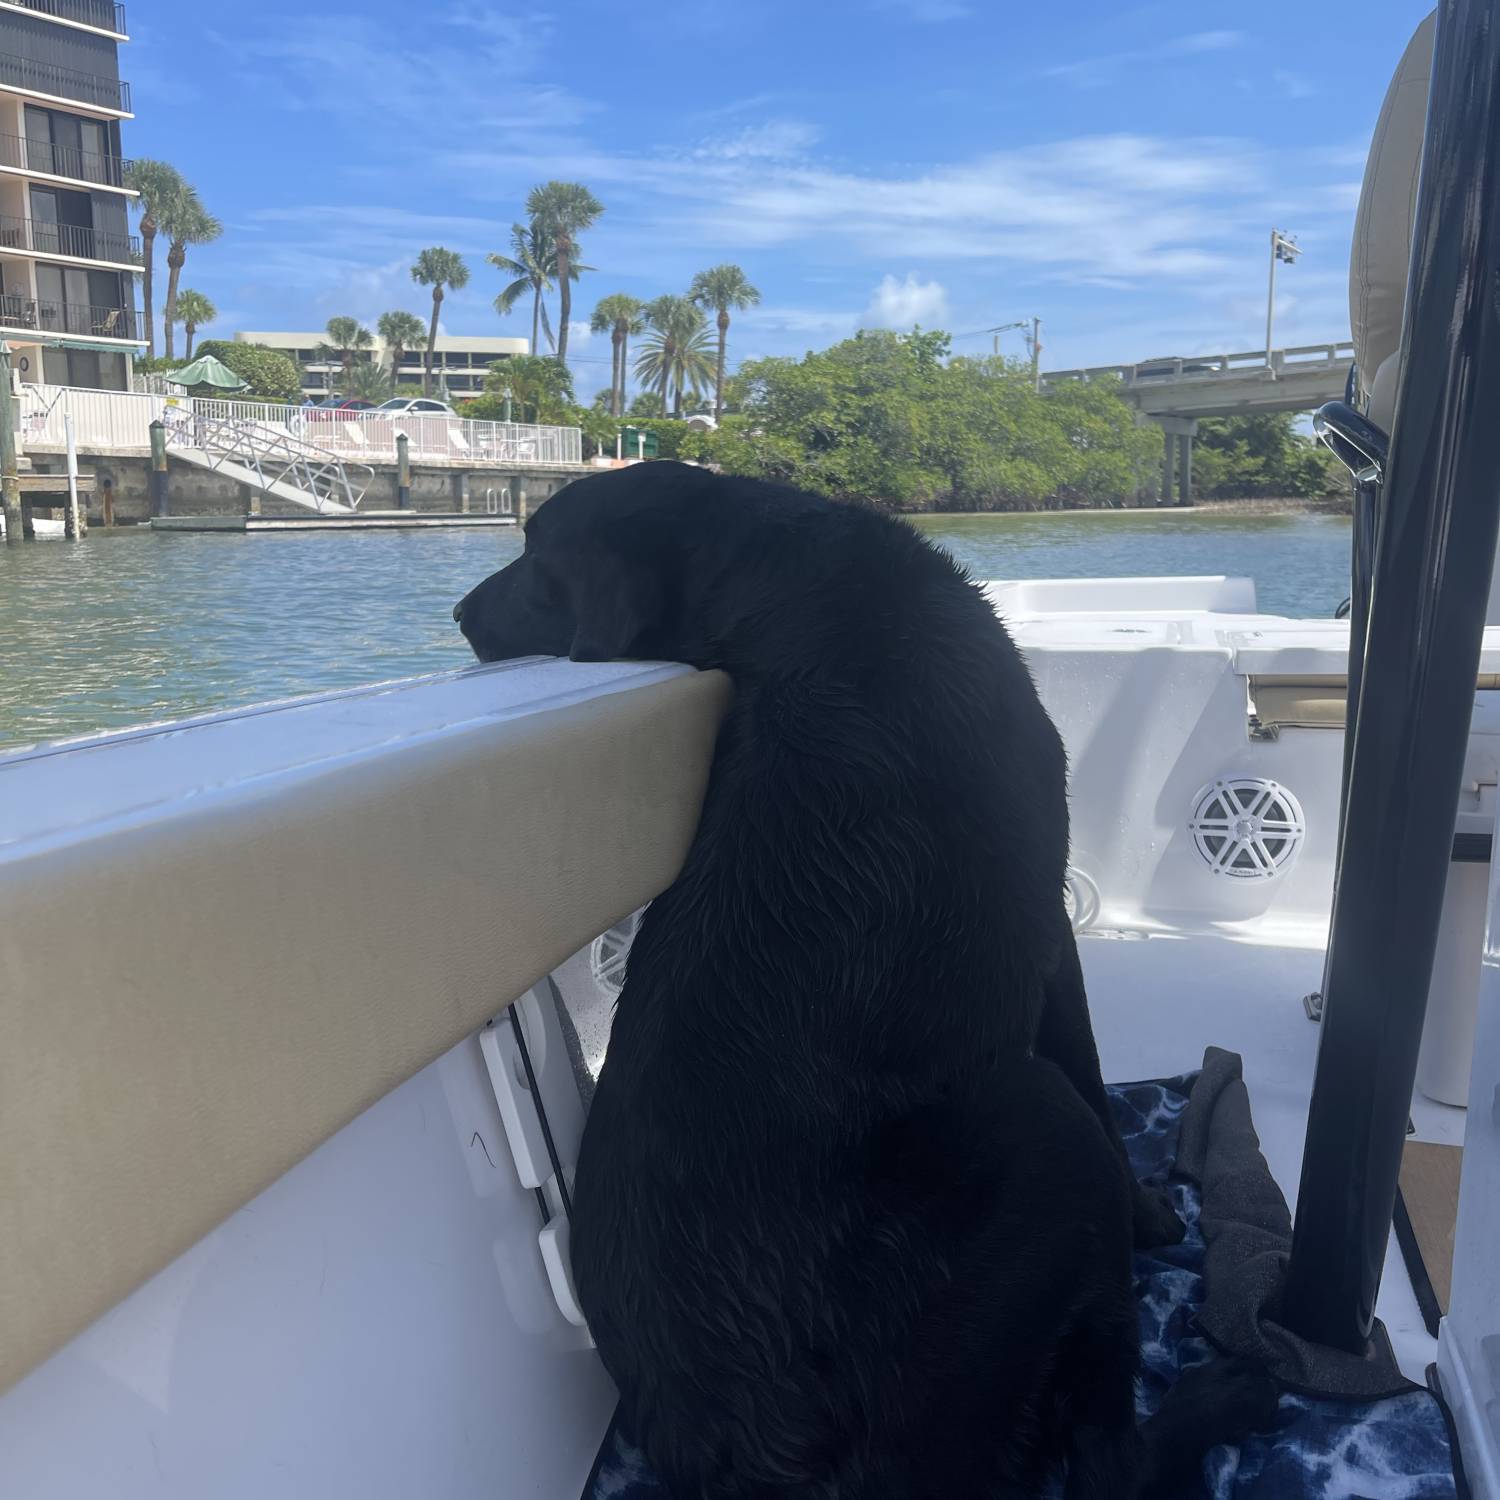 Our black lab loves the boat and swimming more than anything in the world. Here he is complaini...